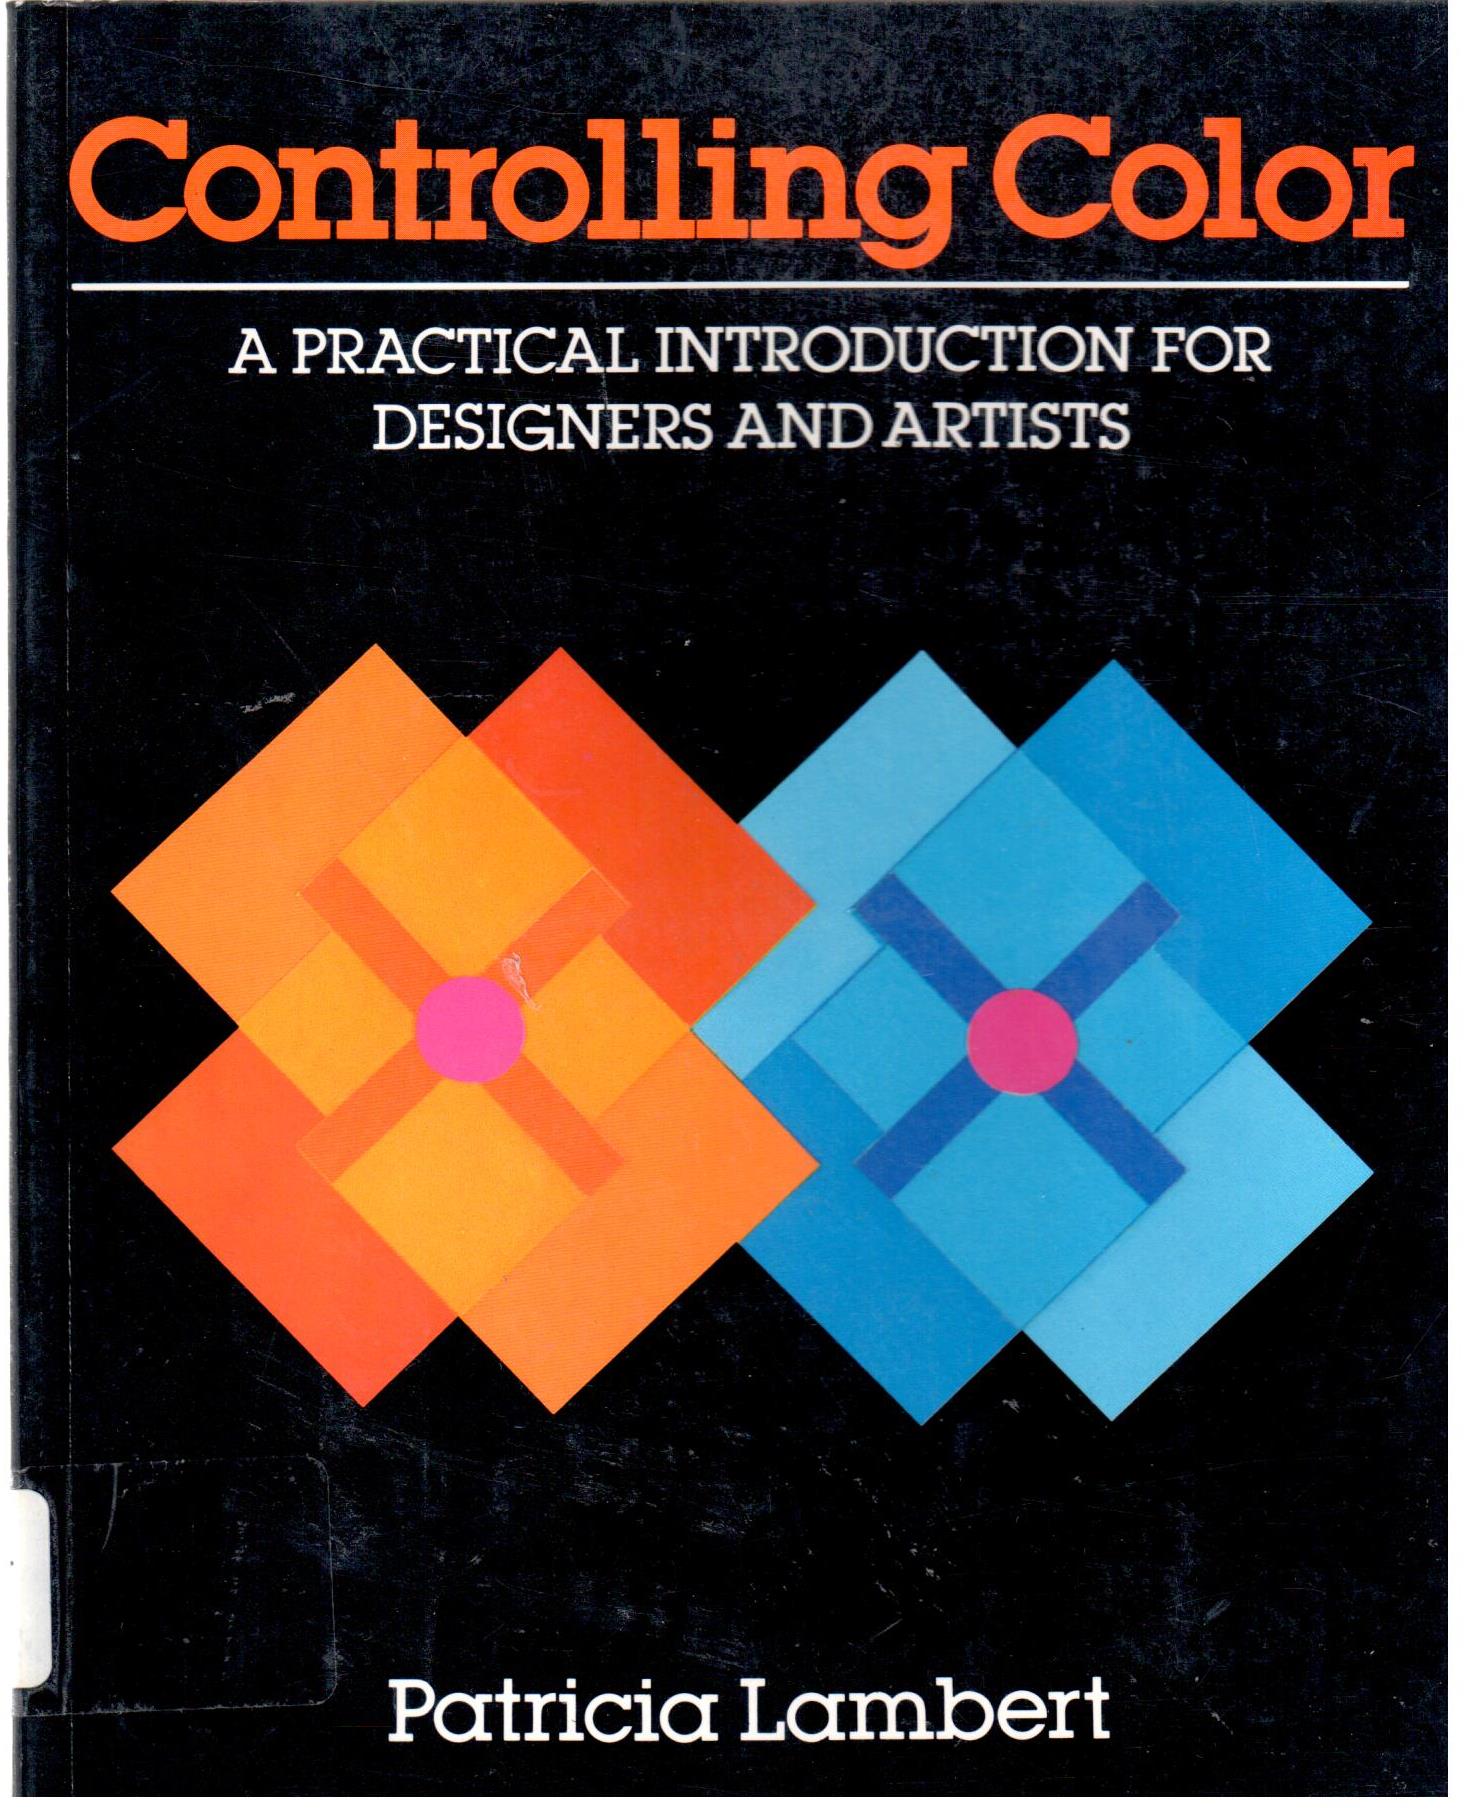 Controlling color : a practical introduction for designers and artists